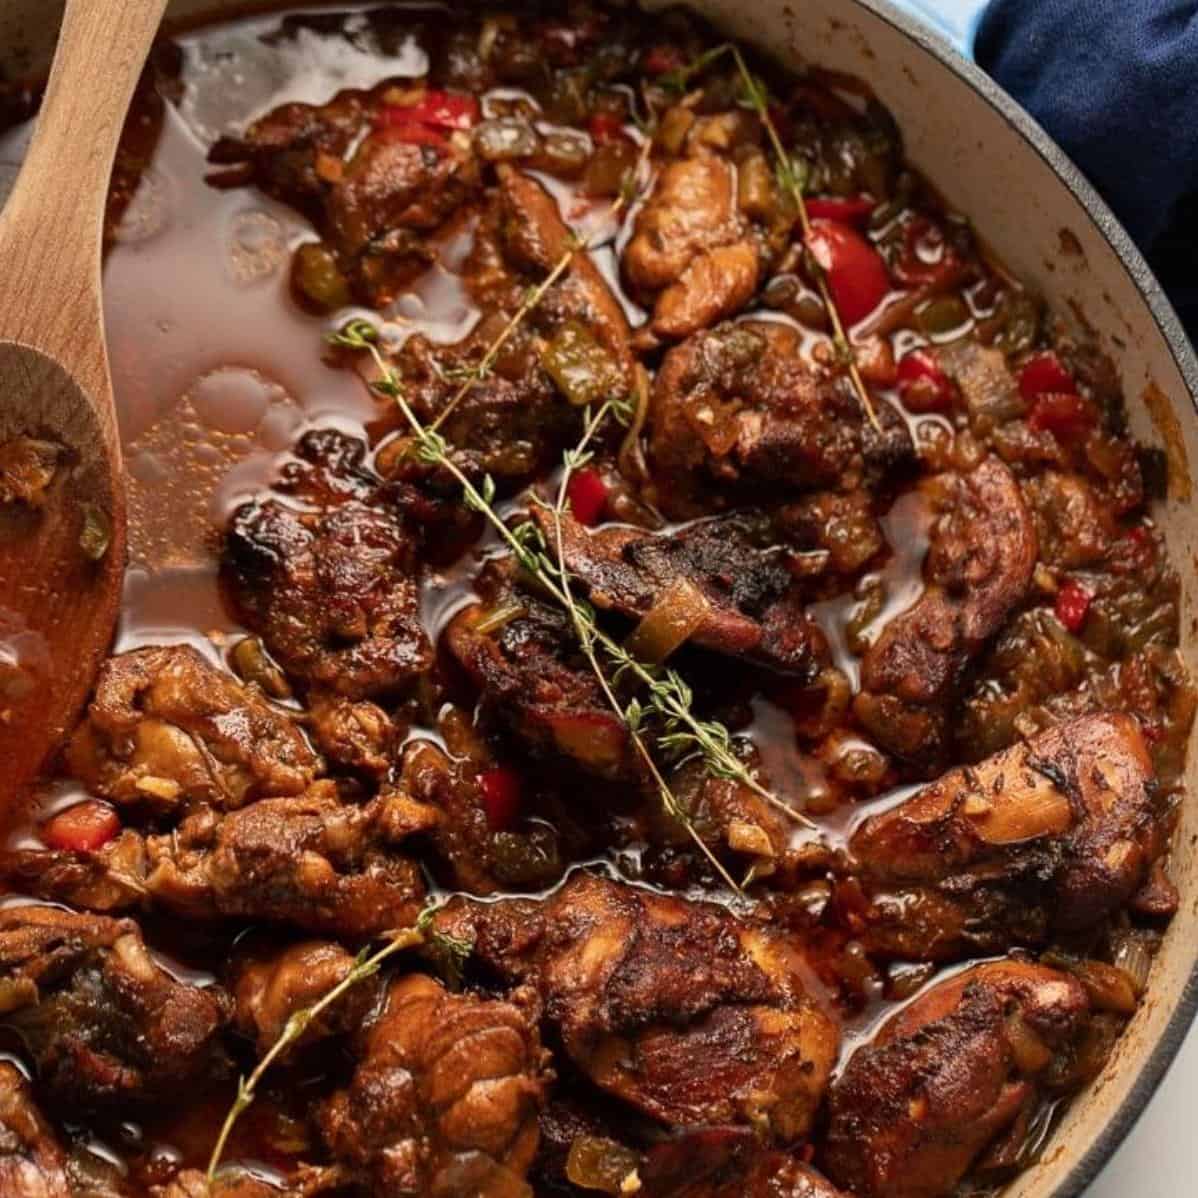  The aroma of the chicken will fill your home, making everyone excited to dig in.